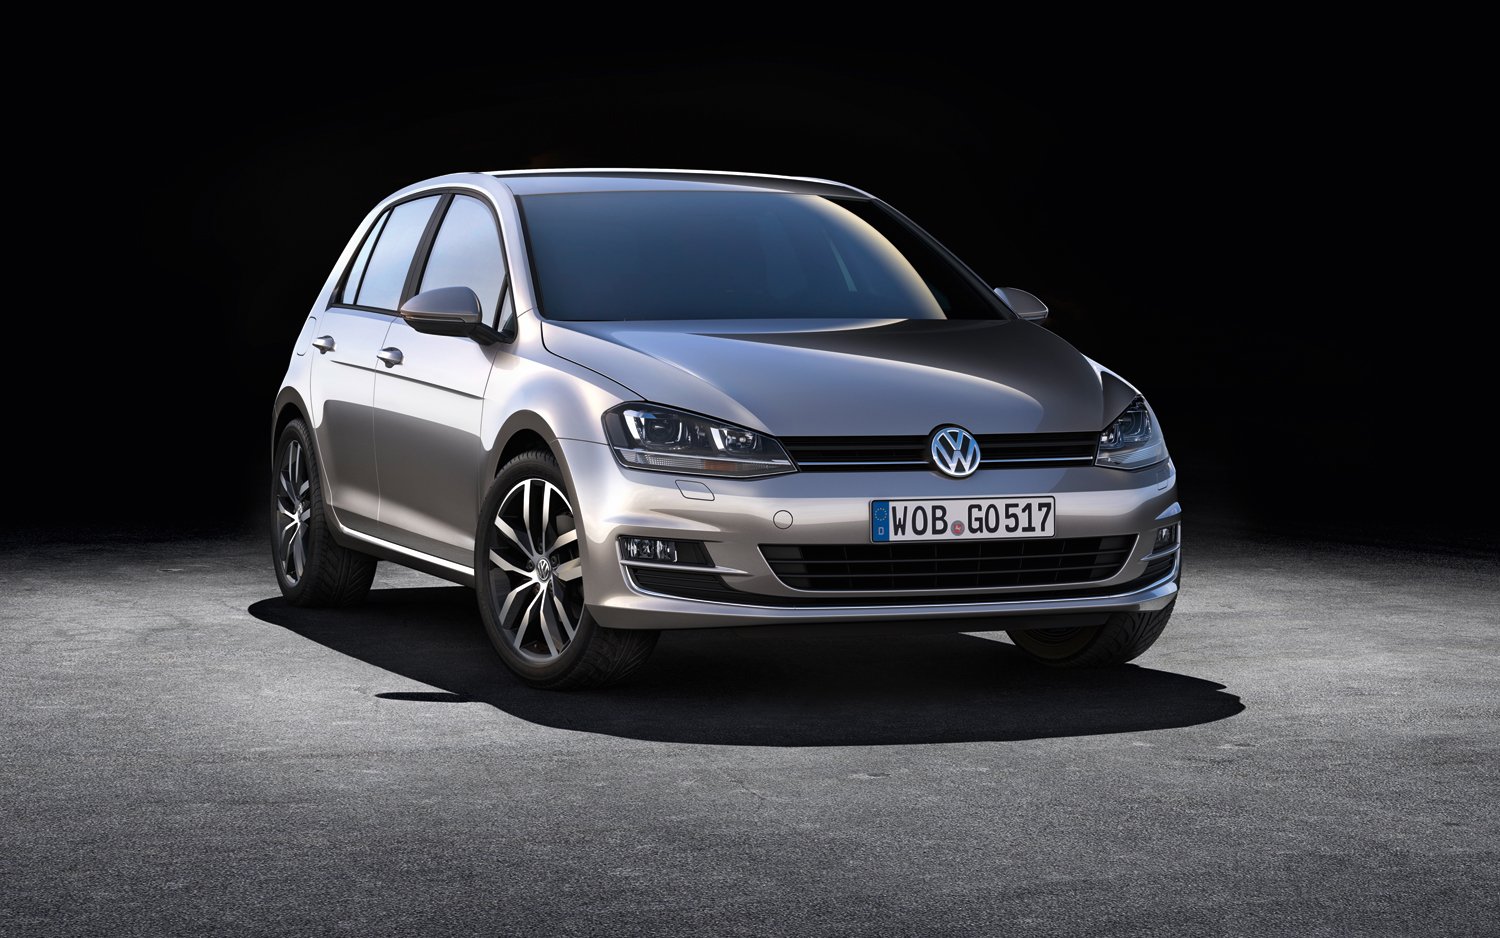 2014 Volkswagen Golf Hd wallpapers New cars reviews